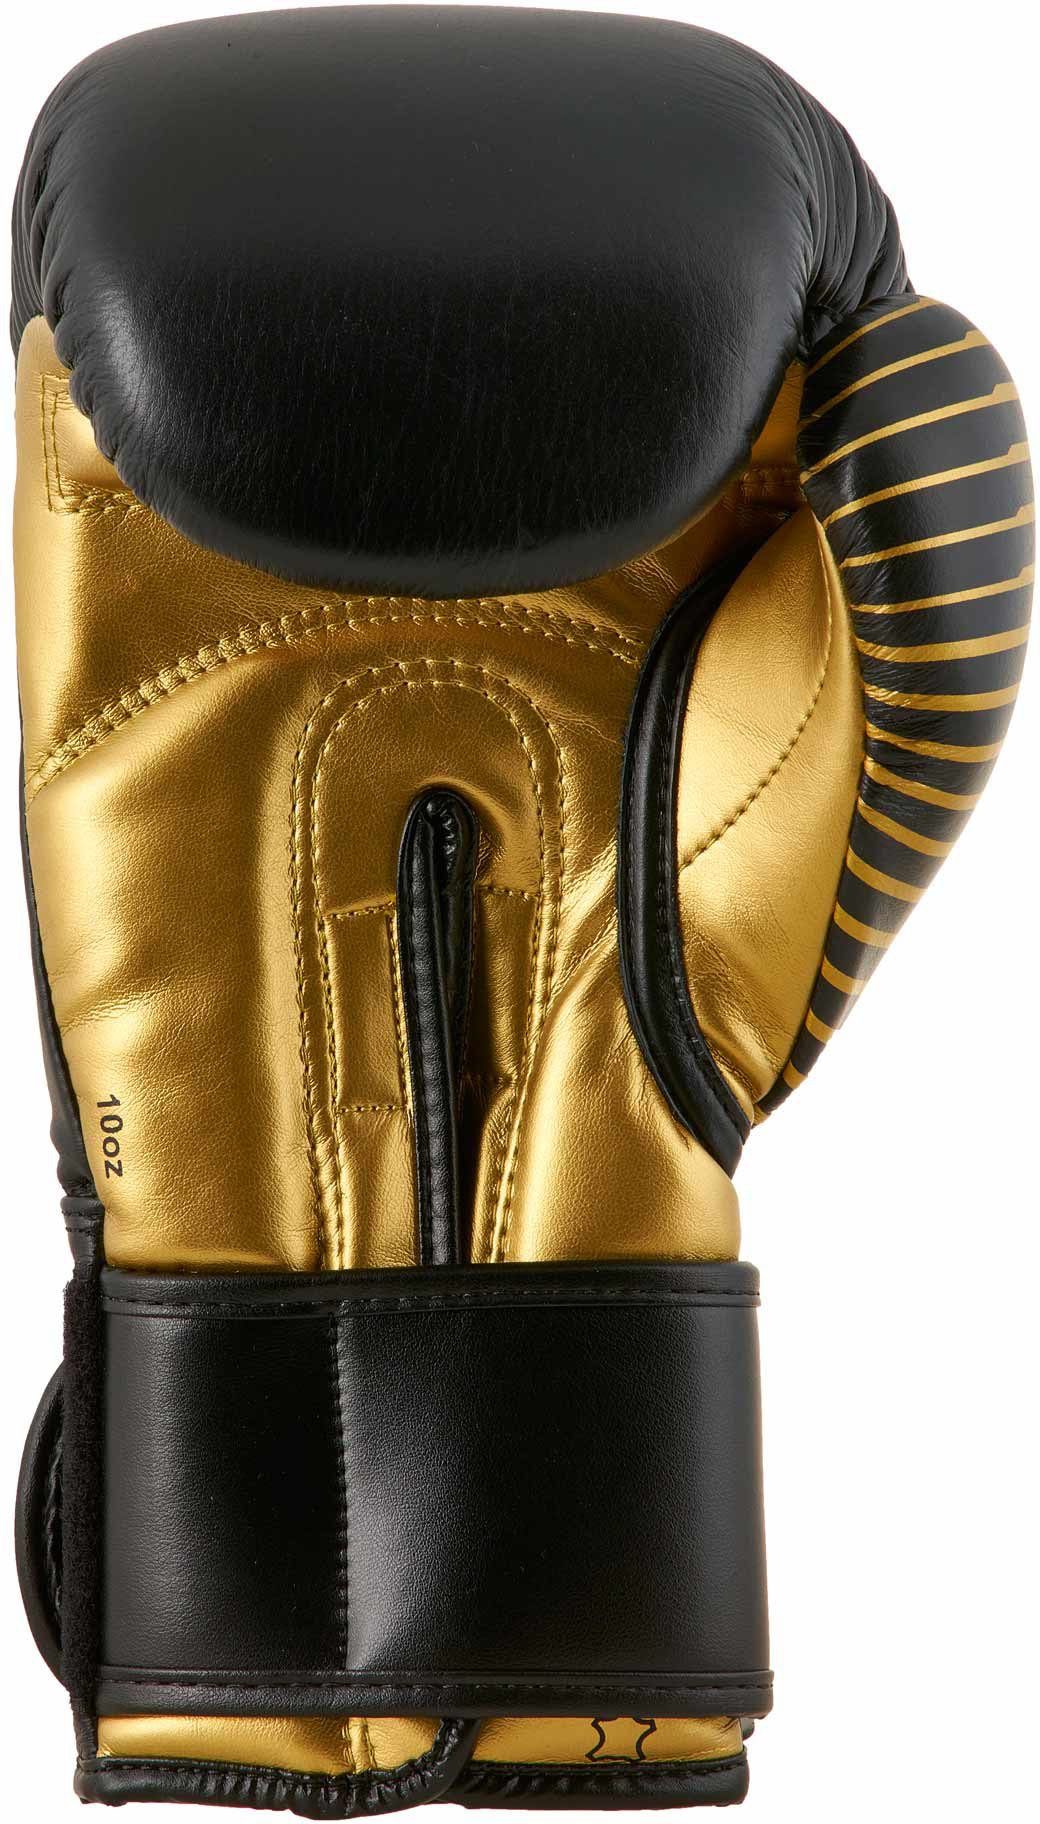 adidas Boxhandschuhe Competition black/gold Handschuh Performance